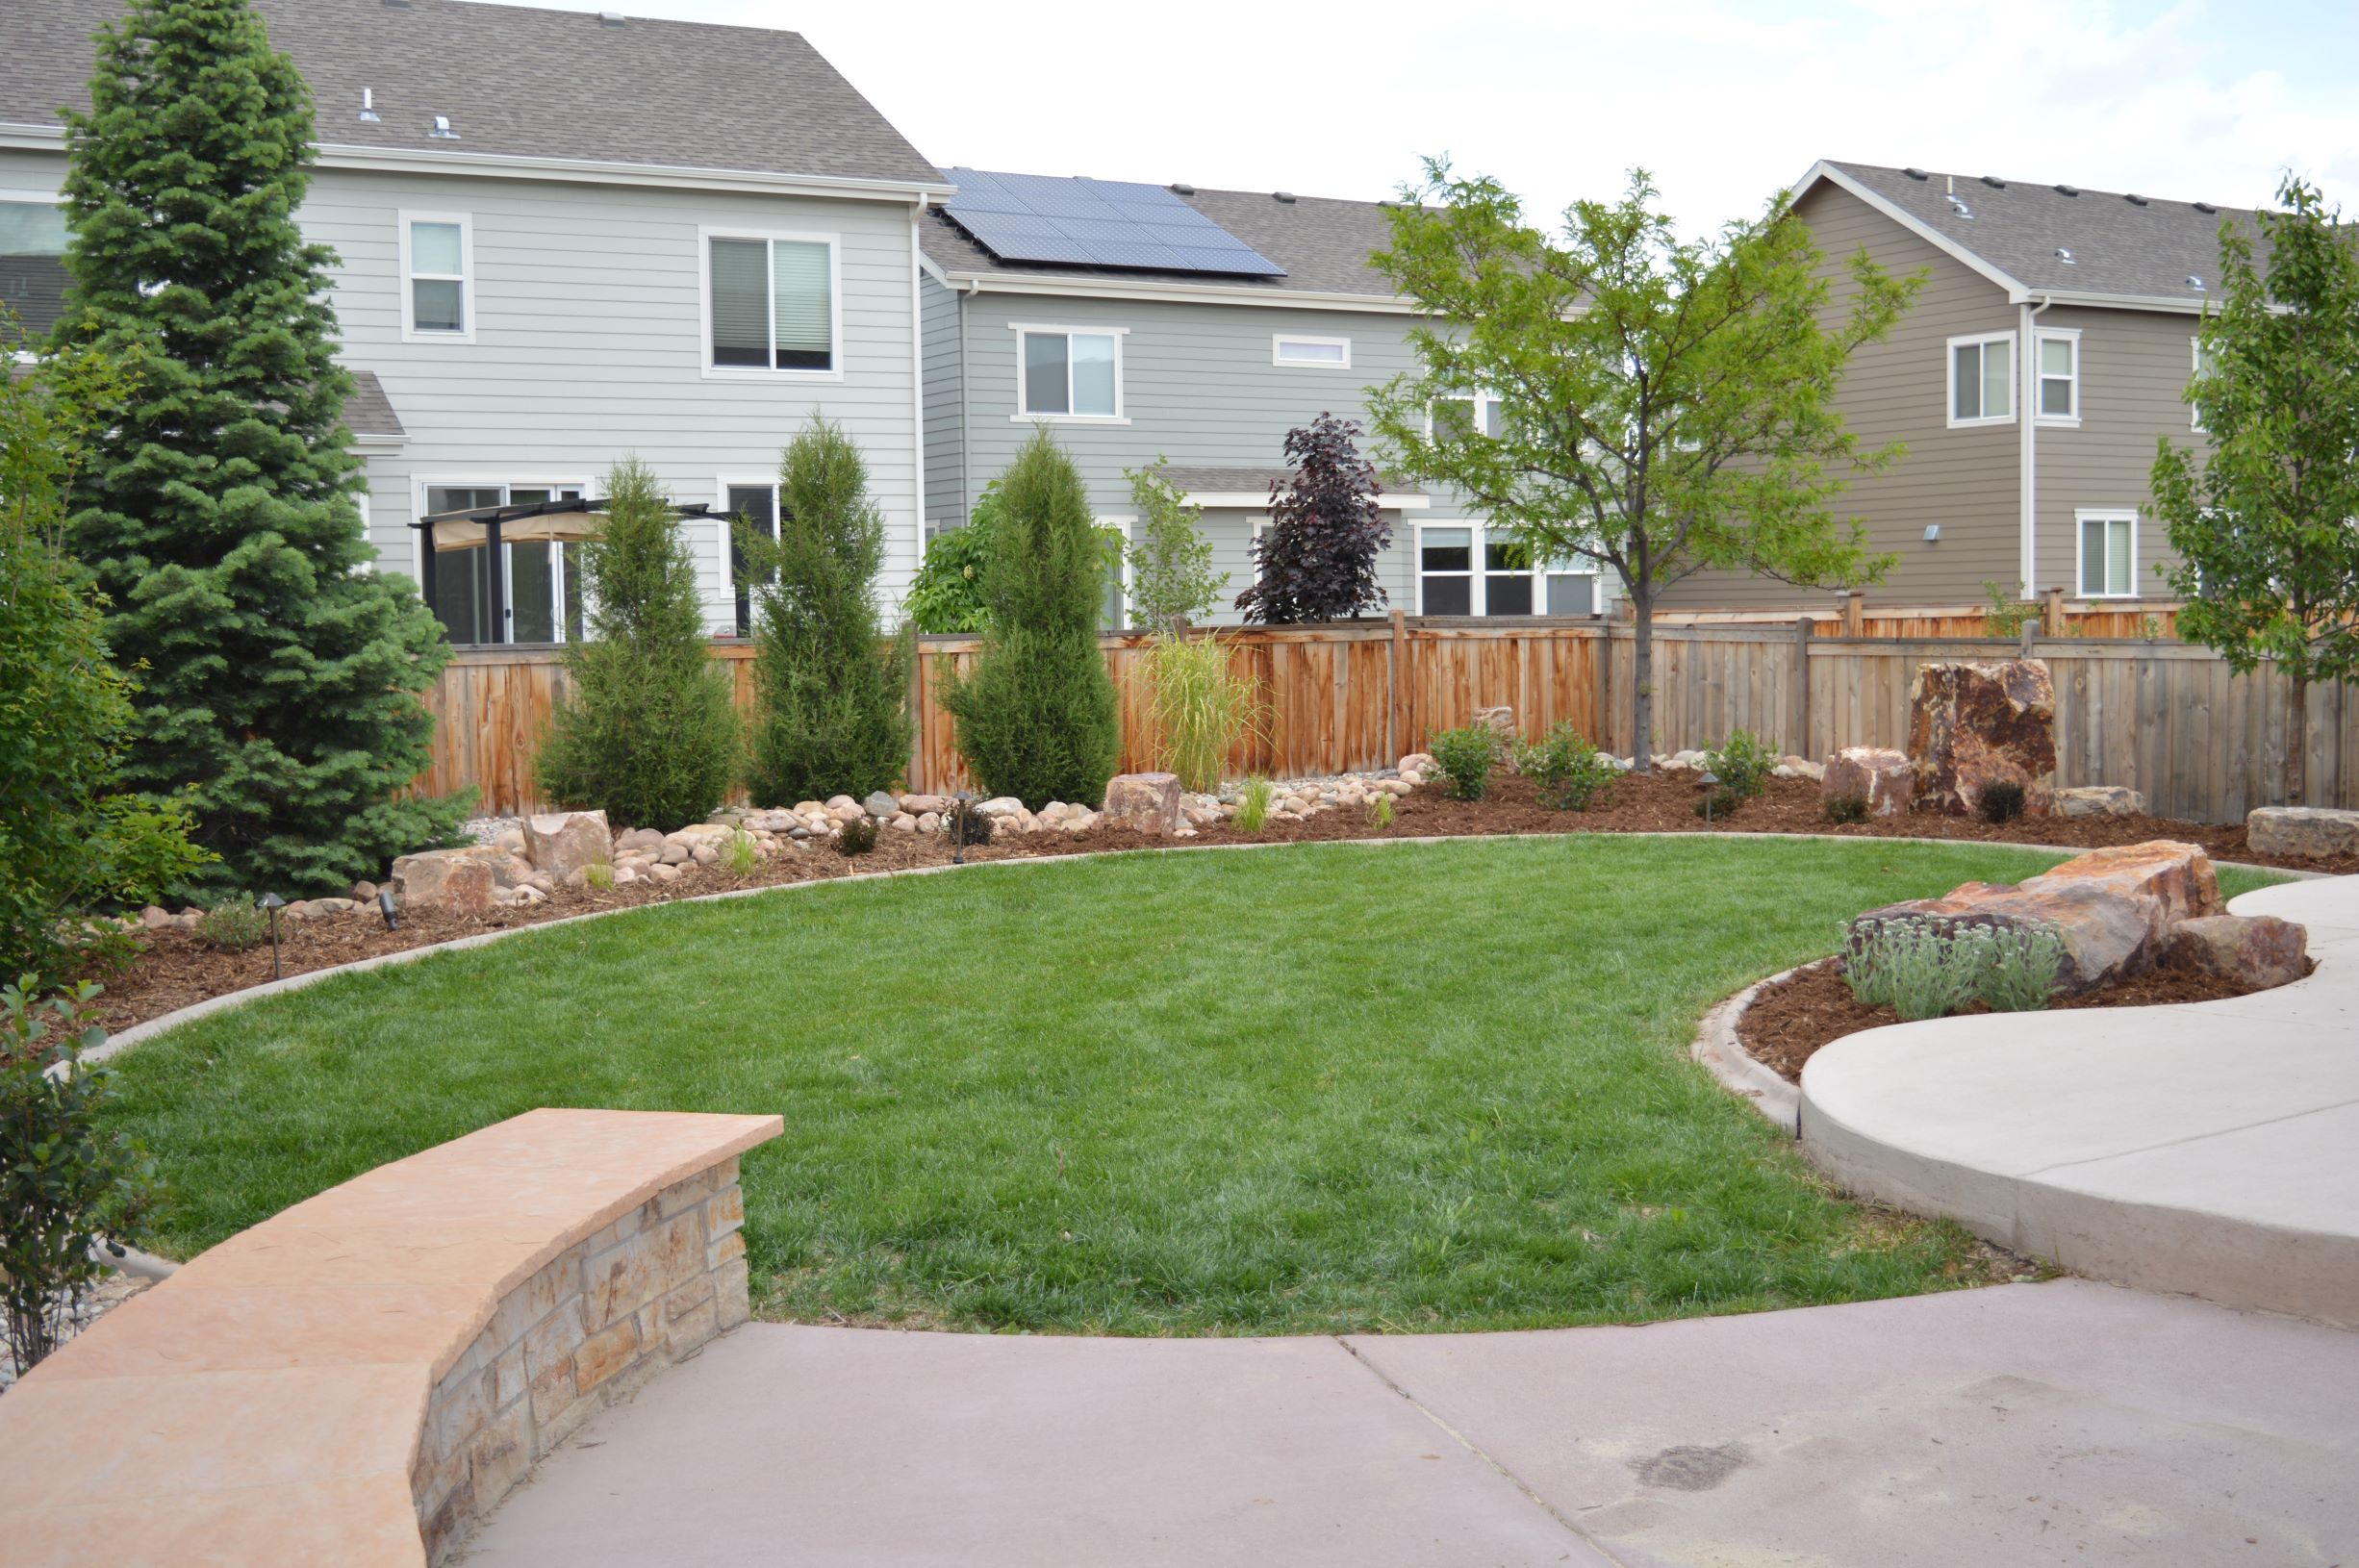 Concrete mow strip edged yard surrounded by mulch and large decorative rock.